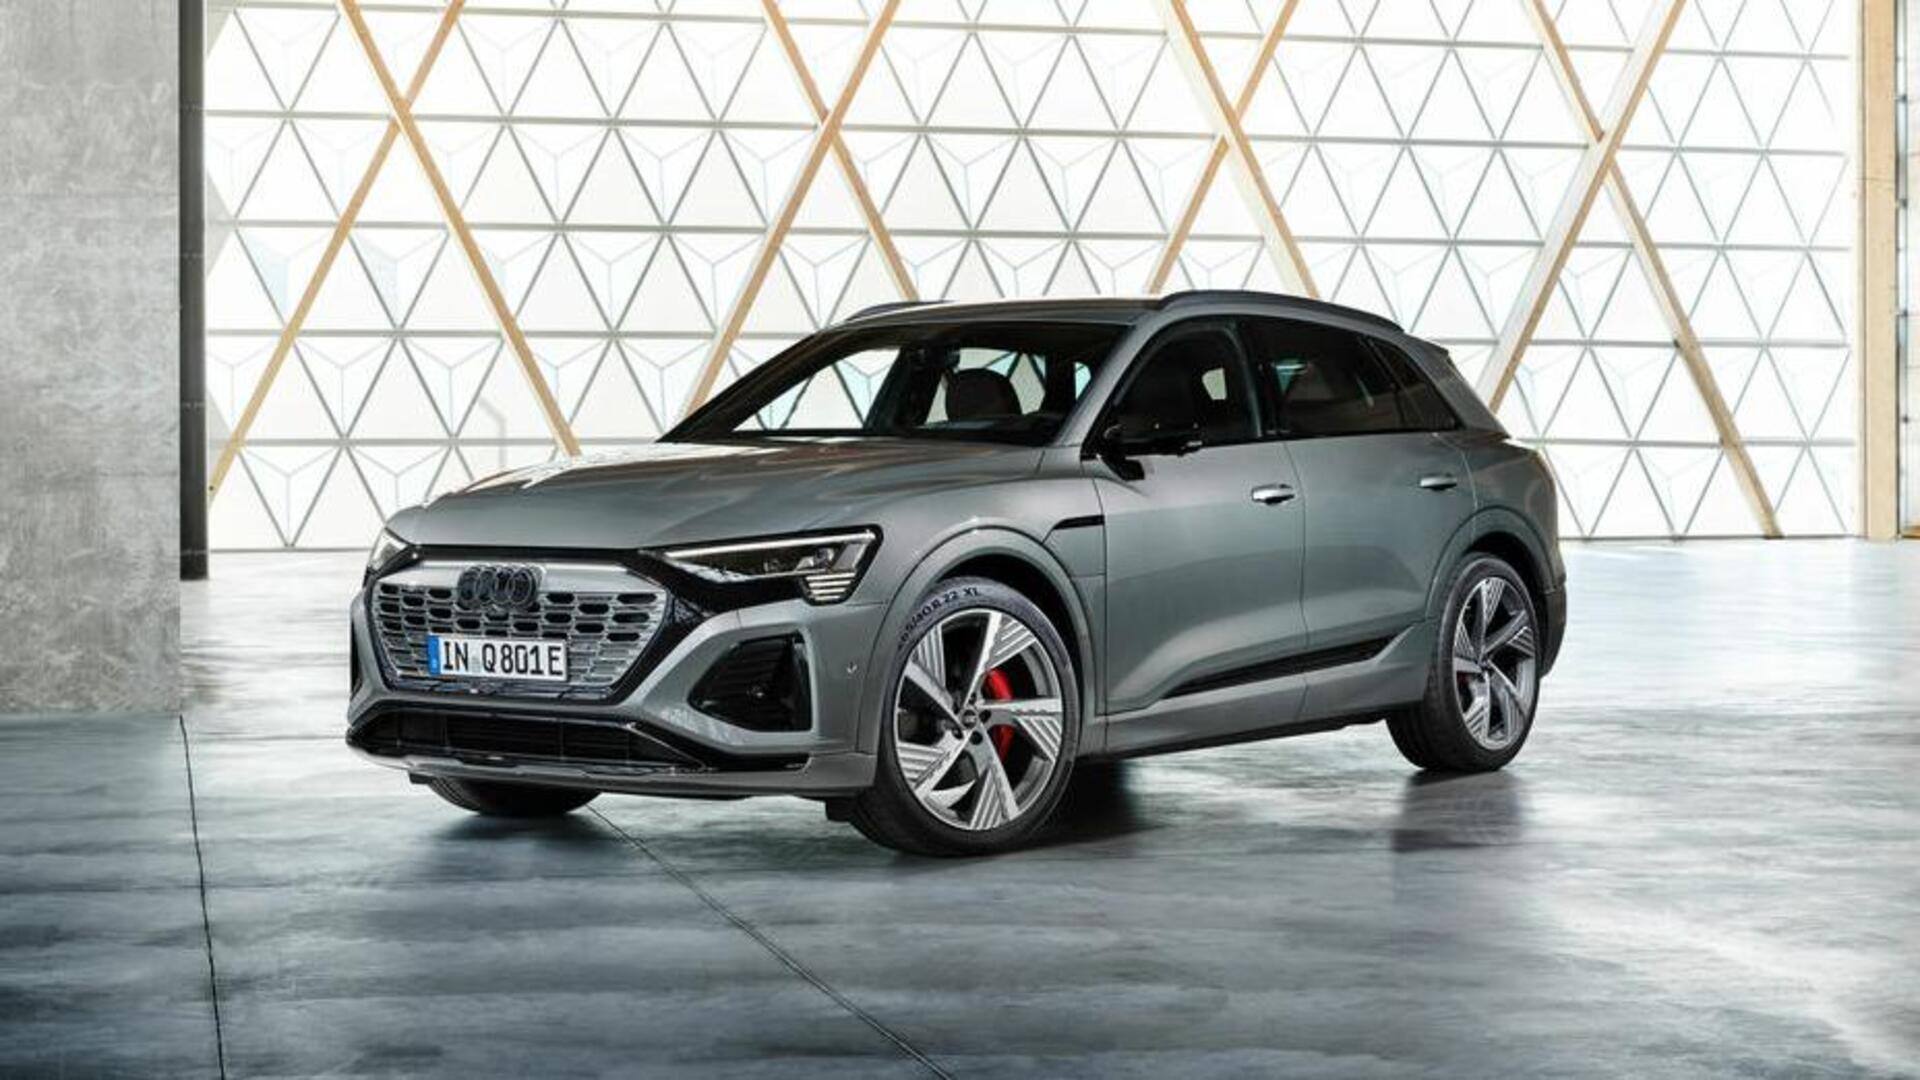 Audi Q8 e-tron to launch in India on August 18